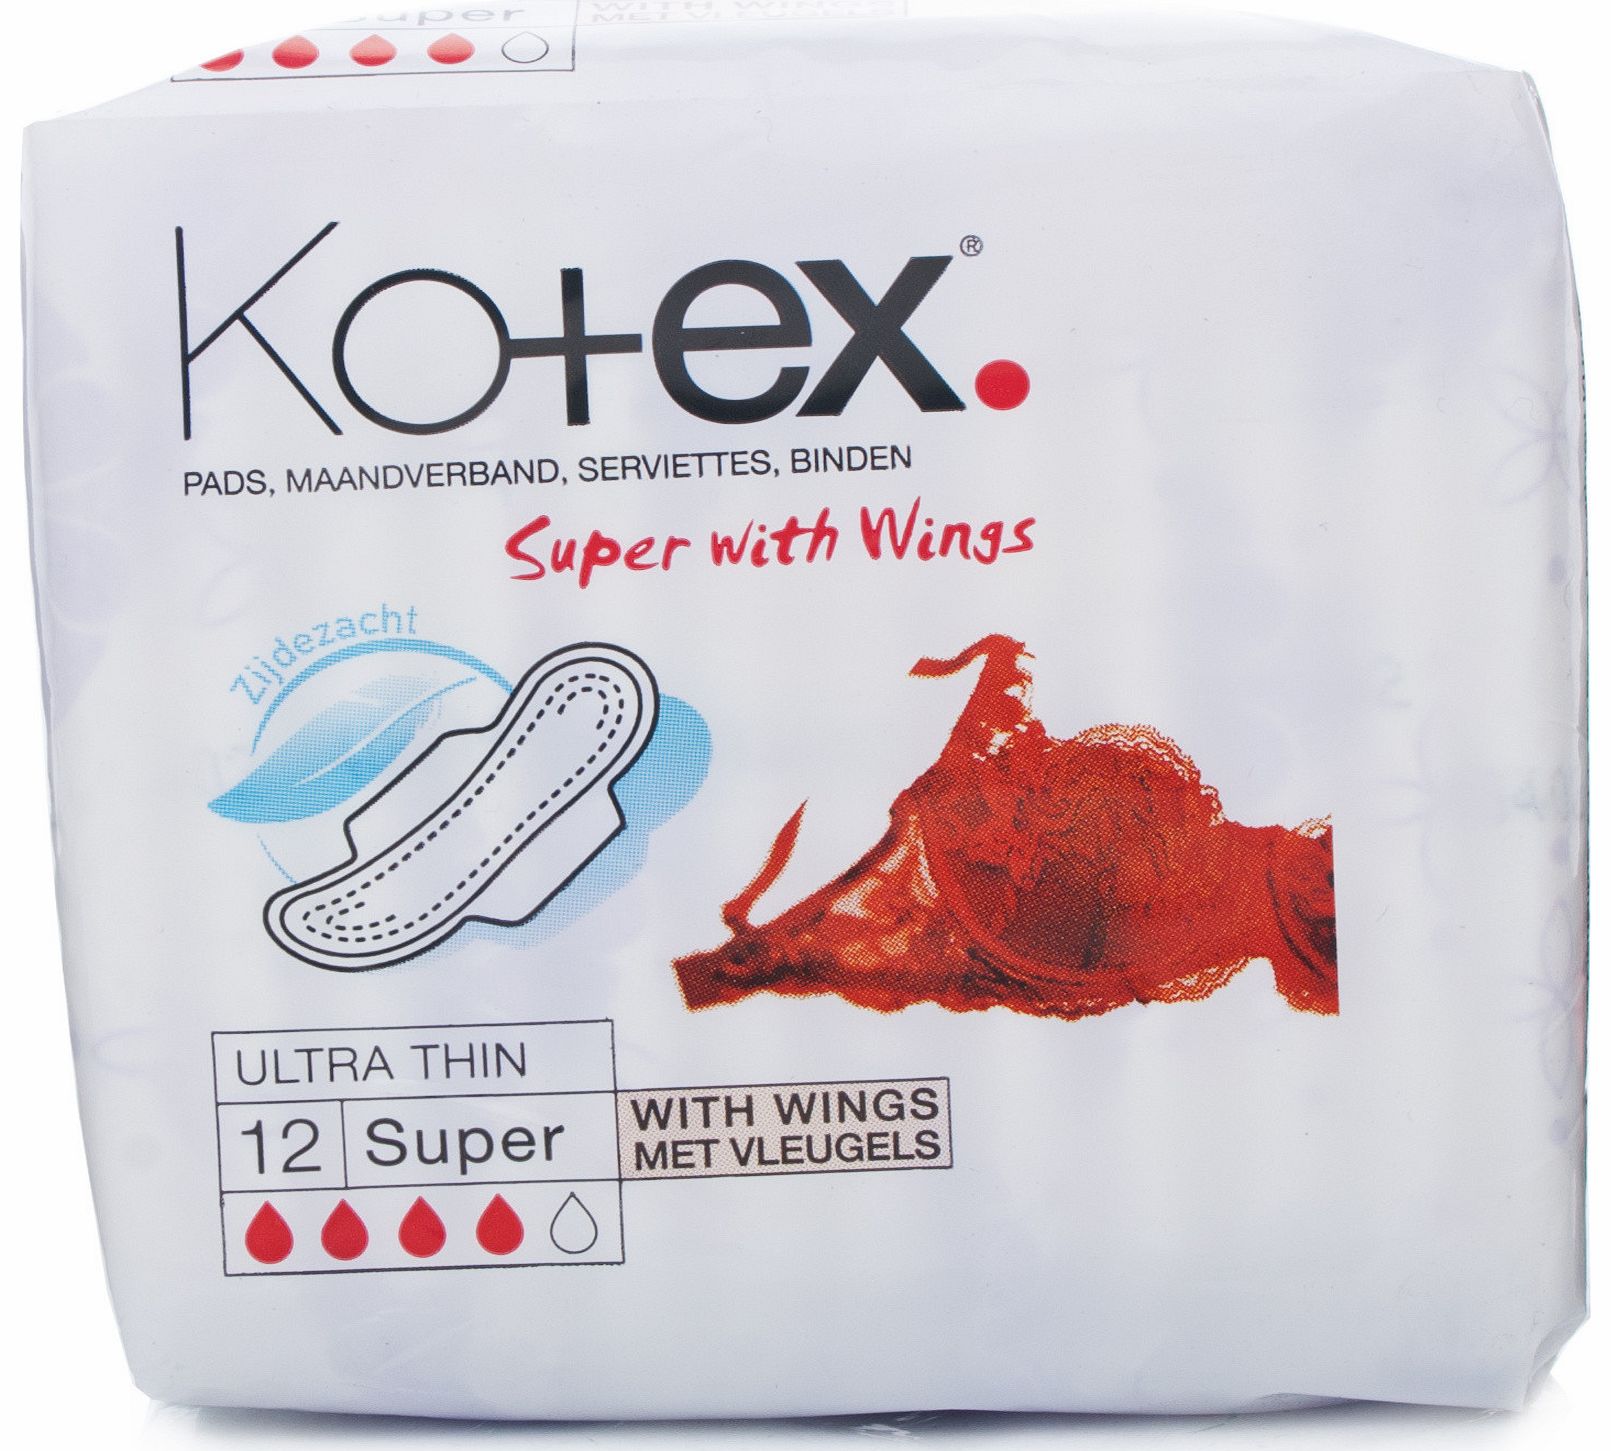 Bodyform Kotex Ultra Thin Super with Wings